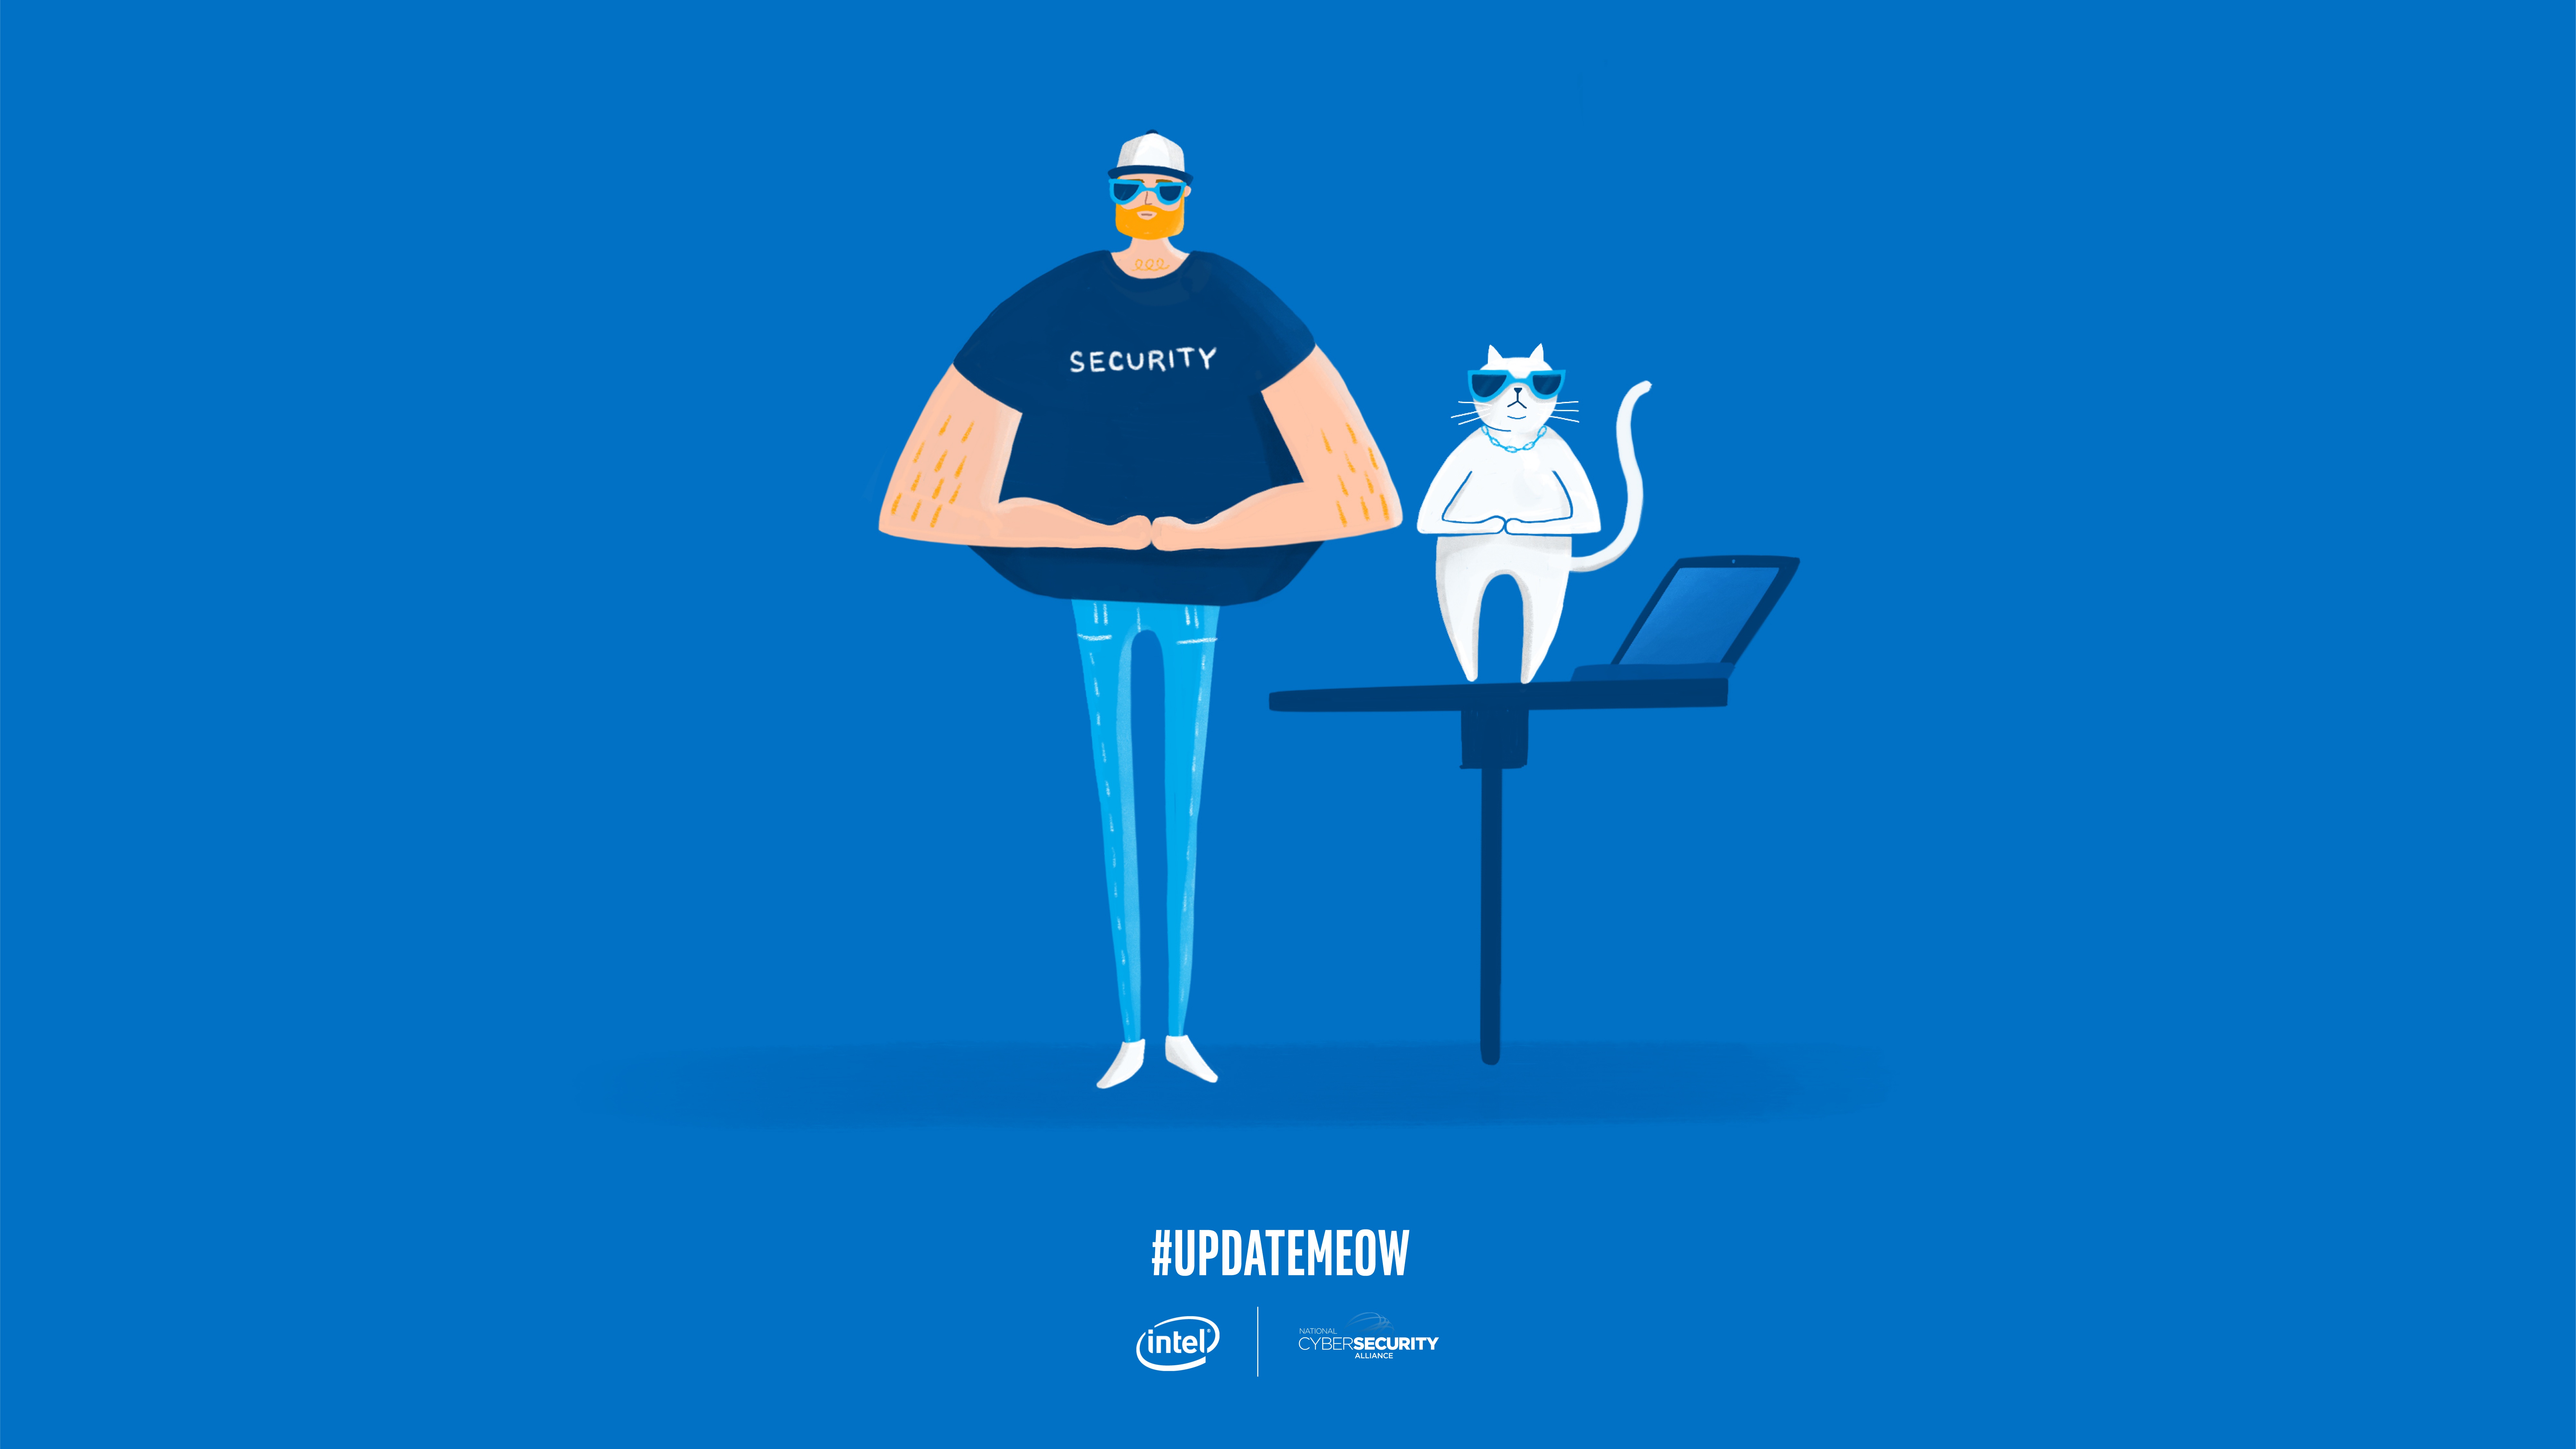 Update Meow Security Wallpaper - Intel I9 , HD Wallpaper & Backgrounds